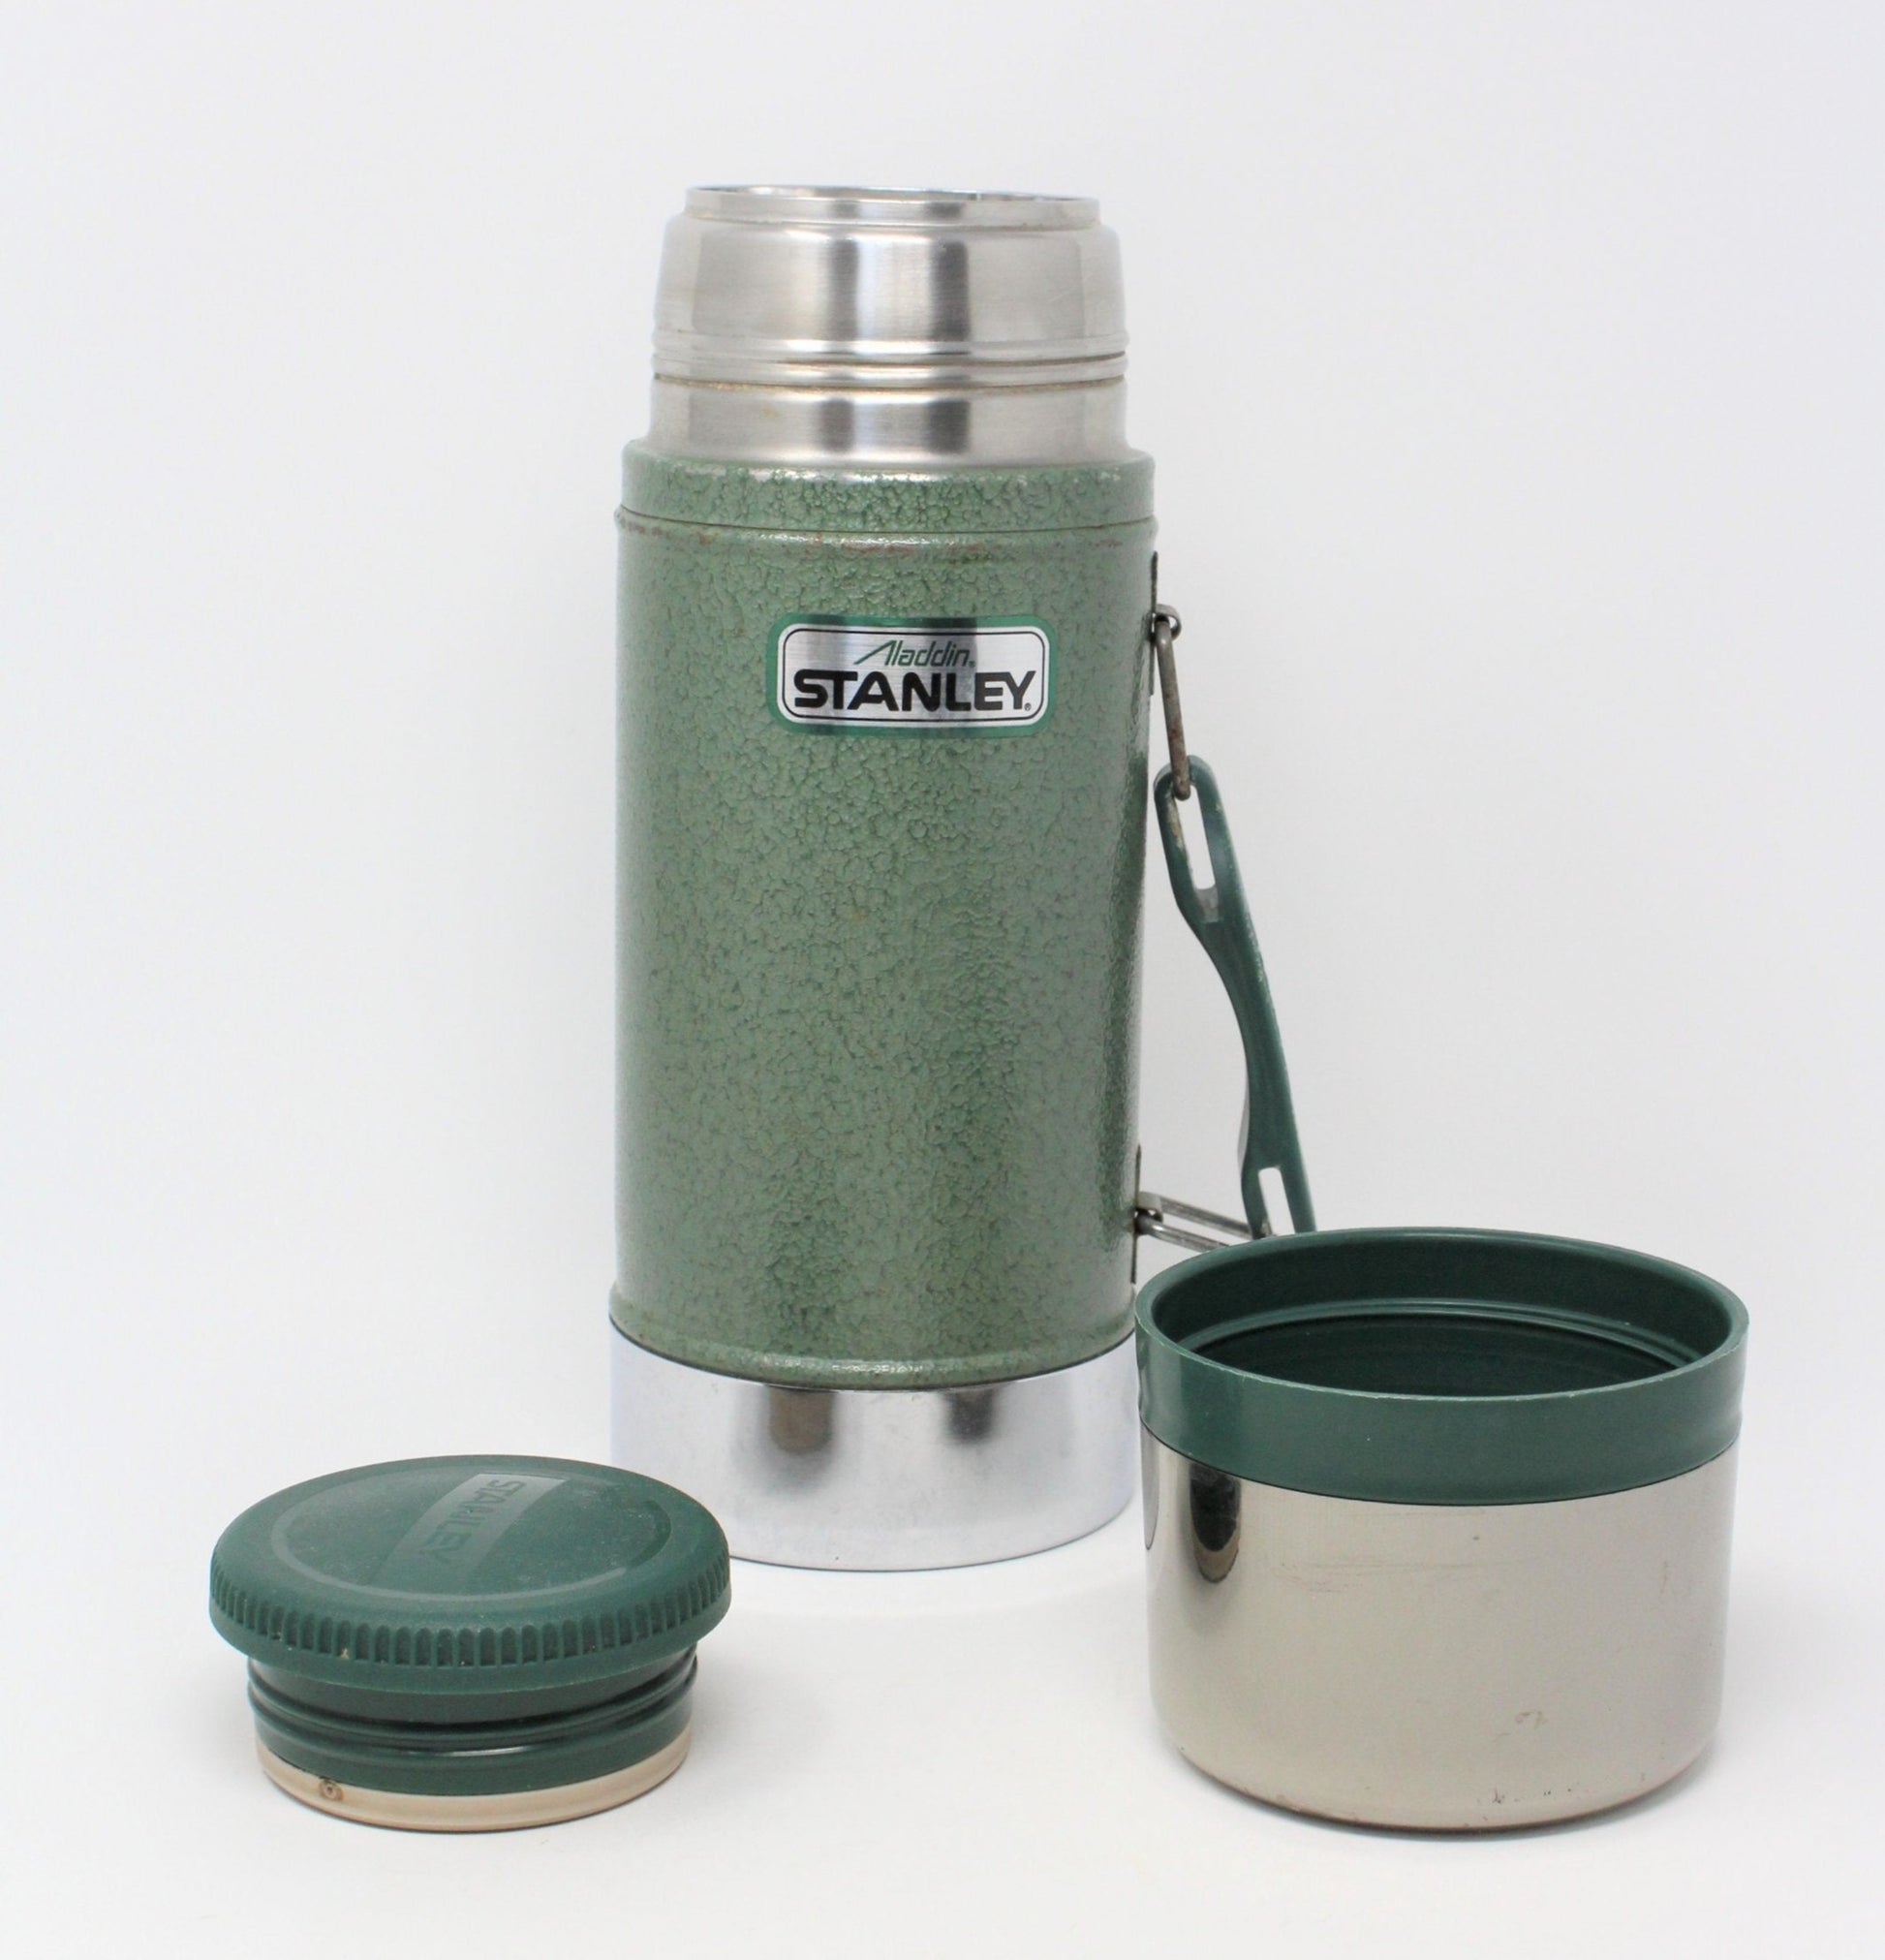 Green Metal Aladdin Stanley Thermos, Vintage Camping Gear - Mendez Manor